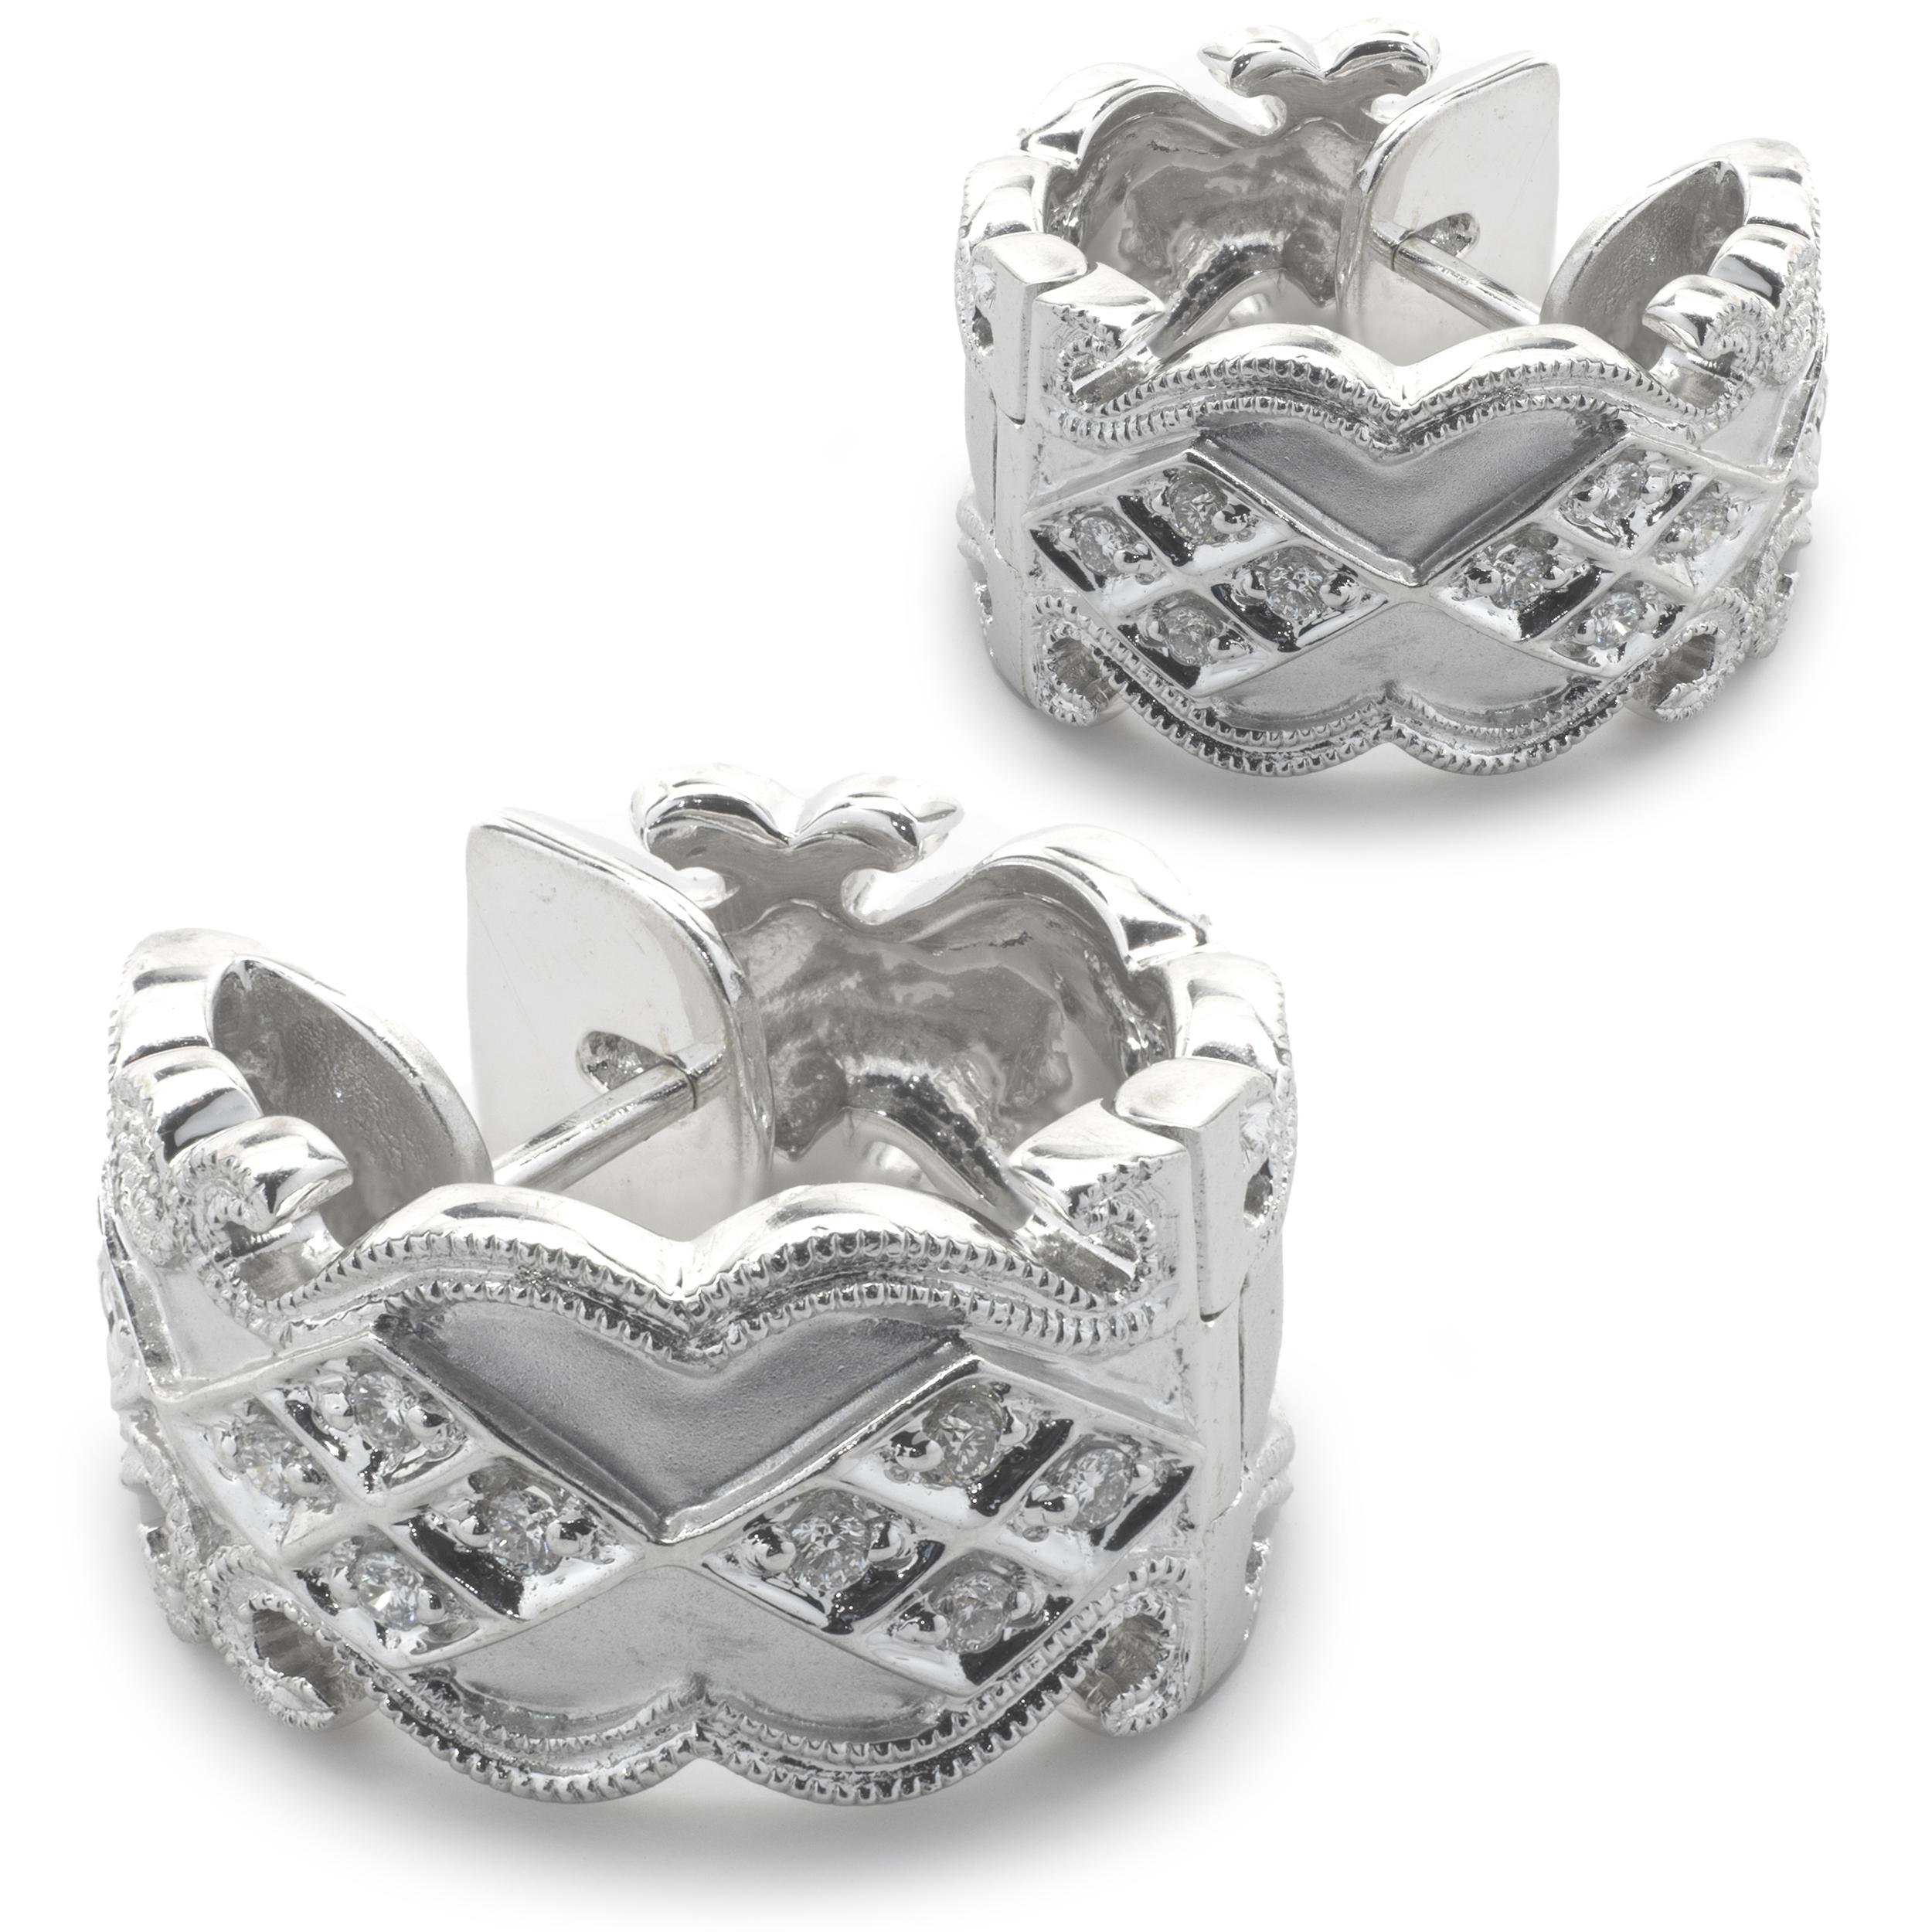 Designer: custom
Material: 18K white gold
Diamond: round brilliant diamonds .22cttw
Color: G
Clarity: VS2
Dimensions: earrings measure 17.8 X 9.51mm
Fastenings: post with snap backs
Weight: 14.90 grams
